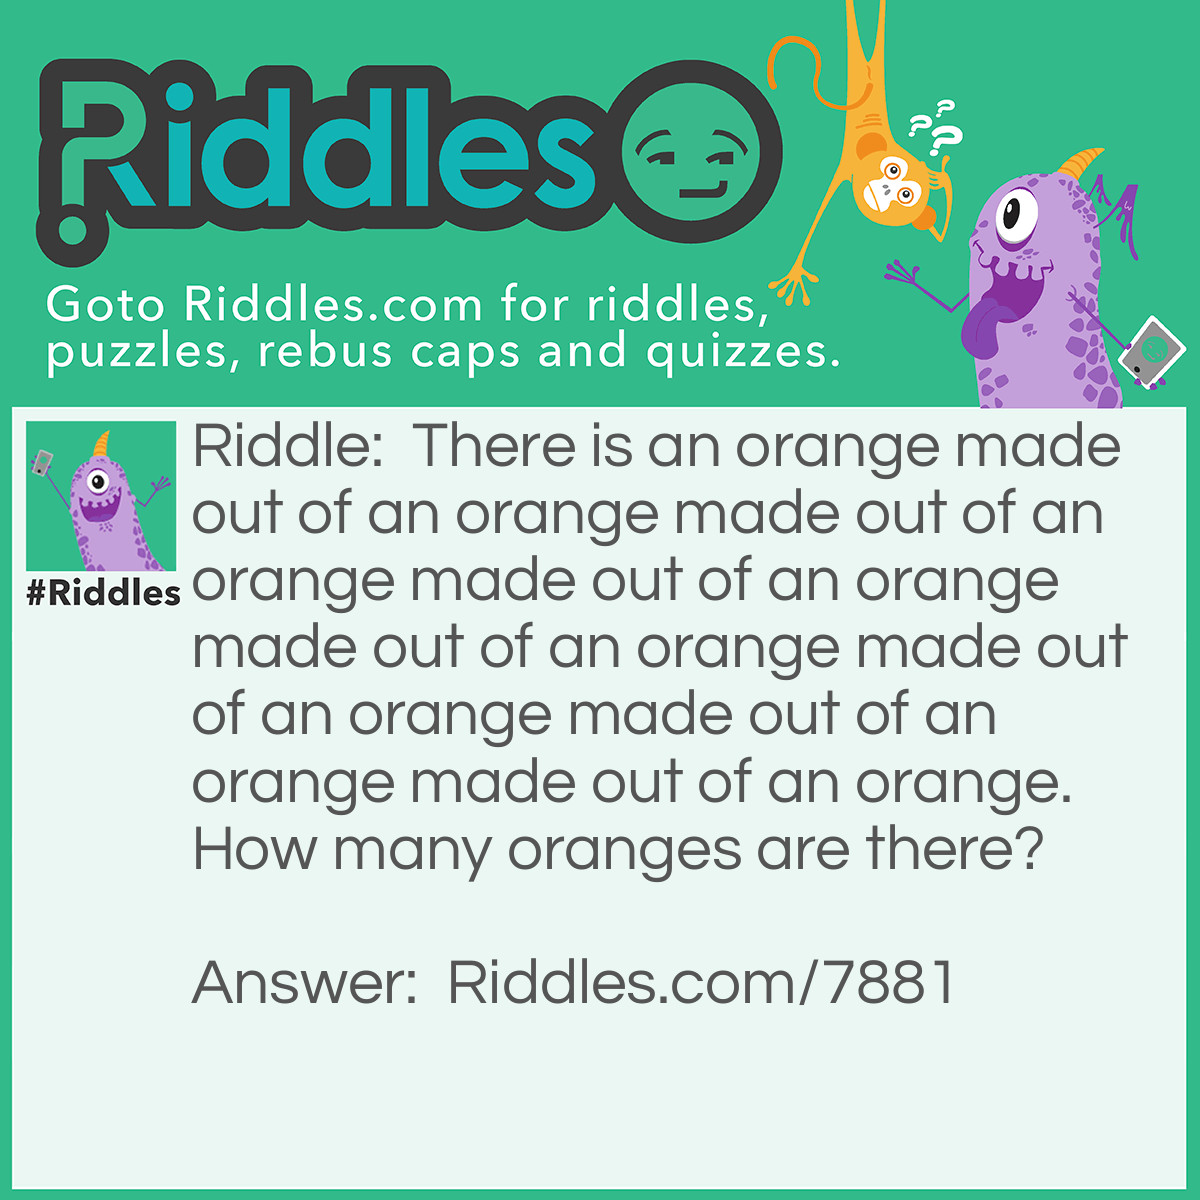 Riddle: There is an orange made out of an orange made out of an orange made out of an orange made out of an orange made out of an orange made out of an orange made out of an orange. How many oranges are there? Answer: 1. It is made out of itself.